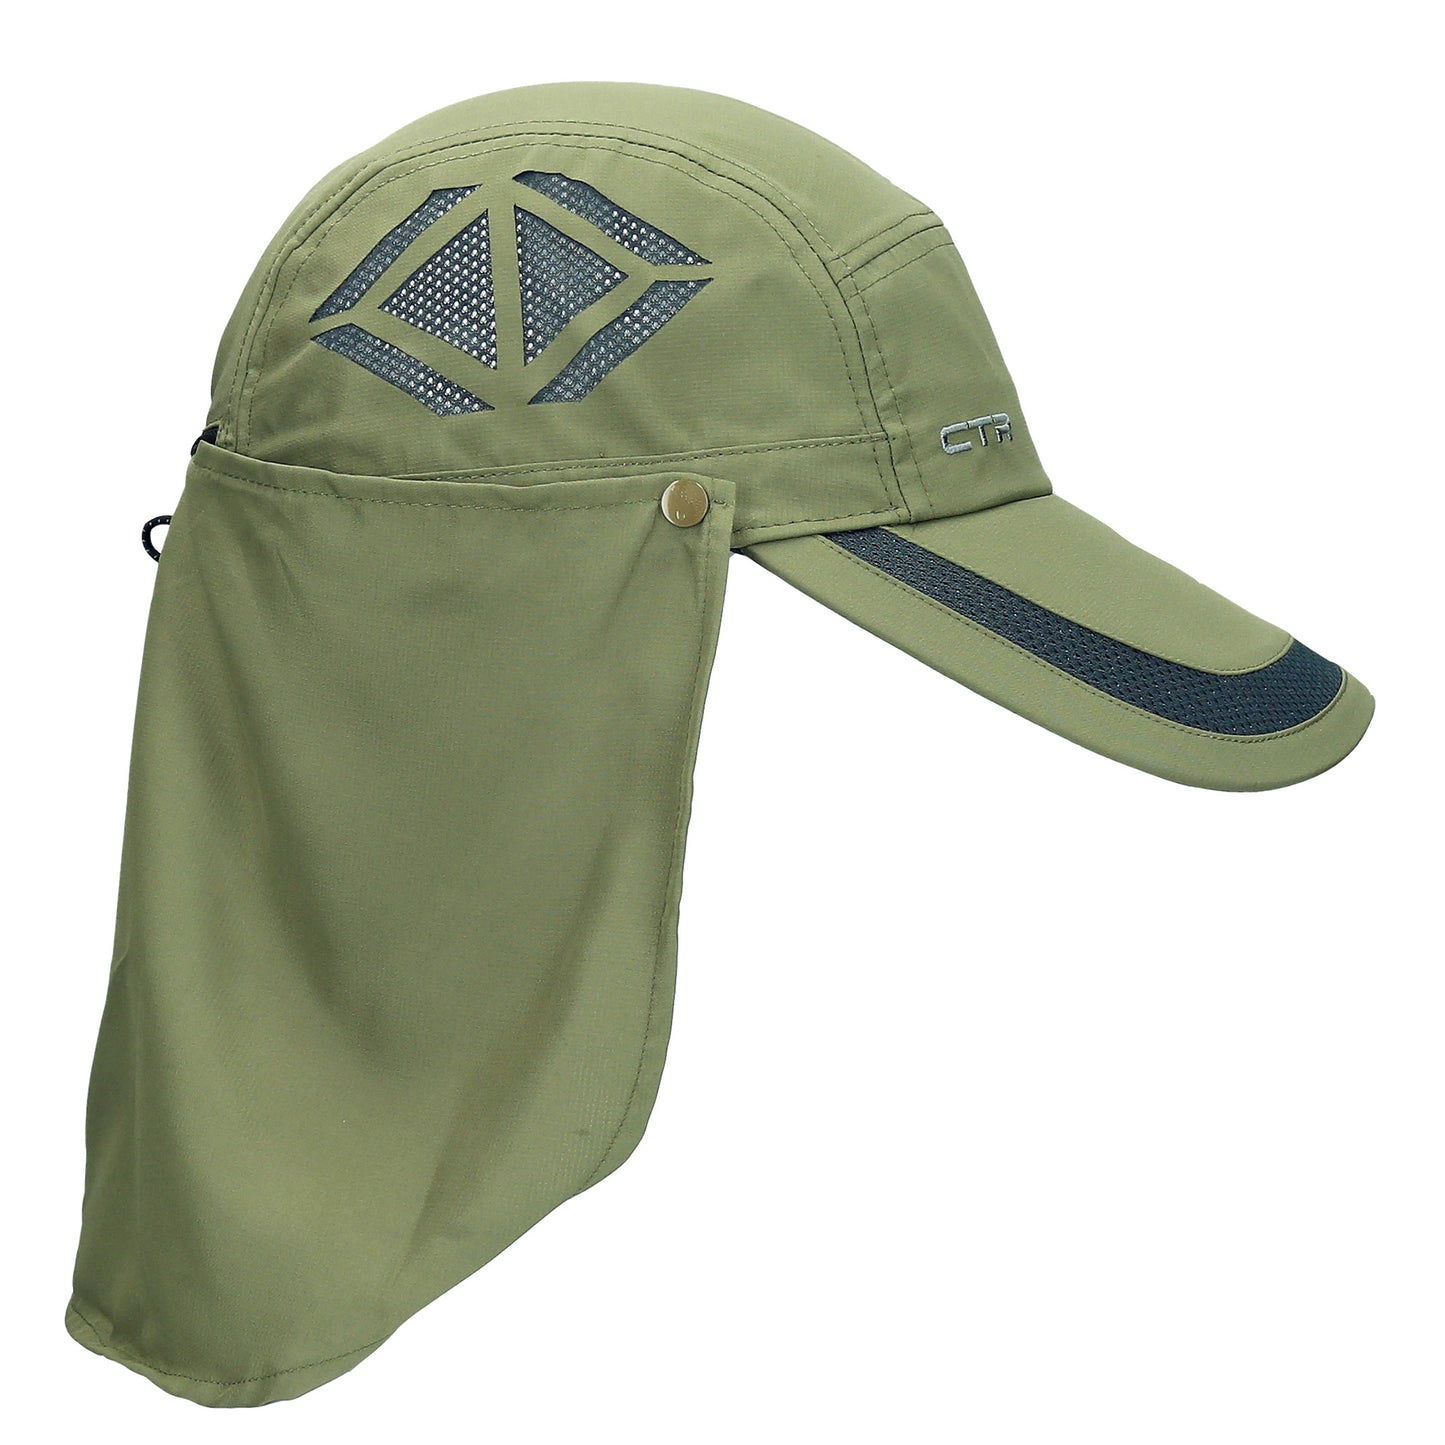 Casquette Nomad Sail CTR Style:1364